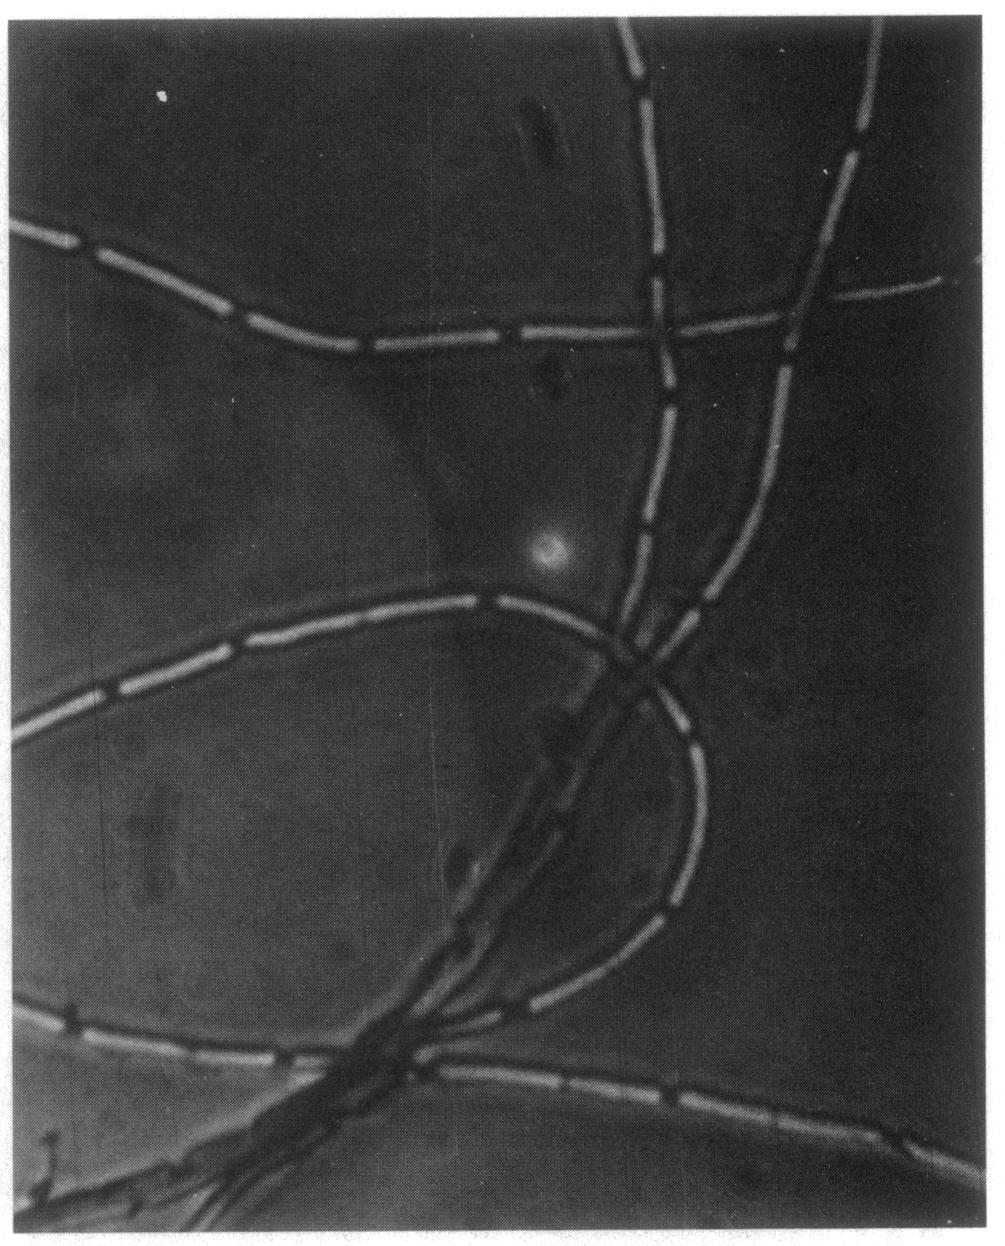 1186 NOTES J. BACTERIOL. FIG. 3. Septa in clones of strain Nil5 after spore outgrowth.